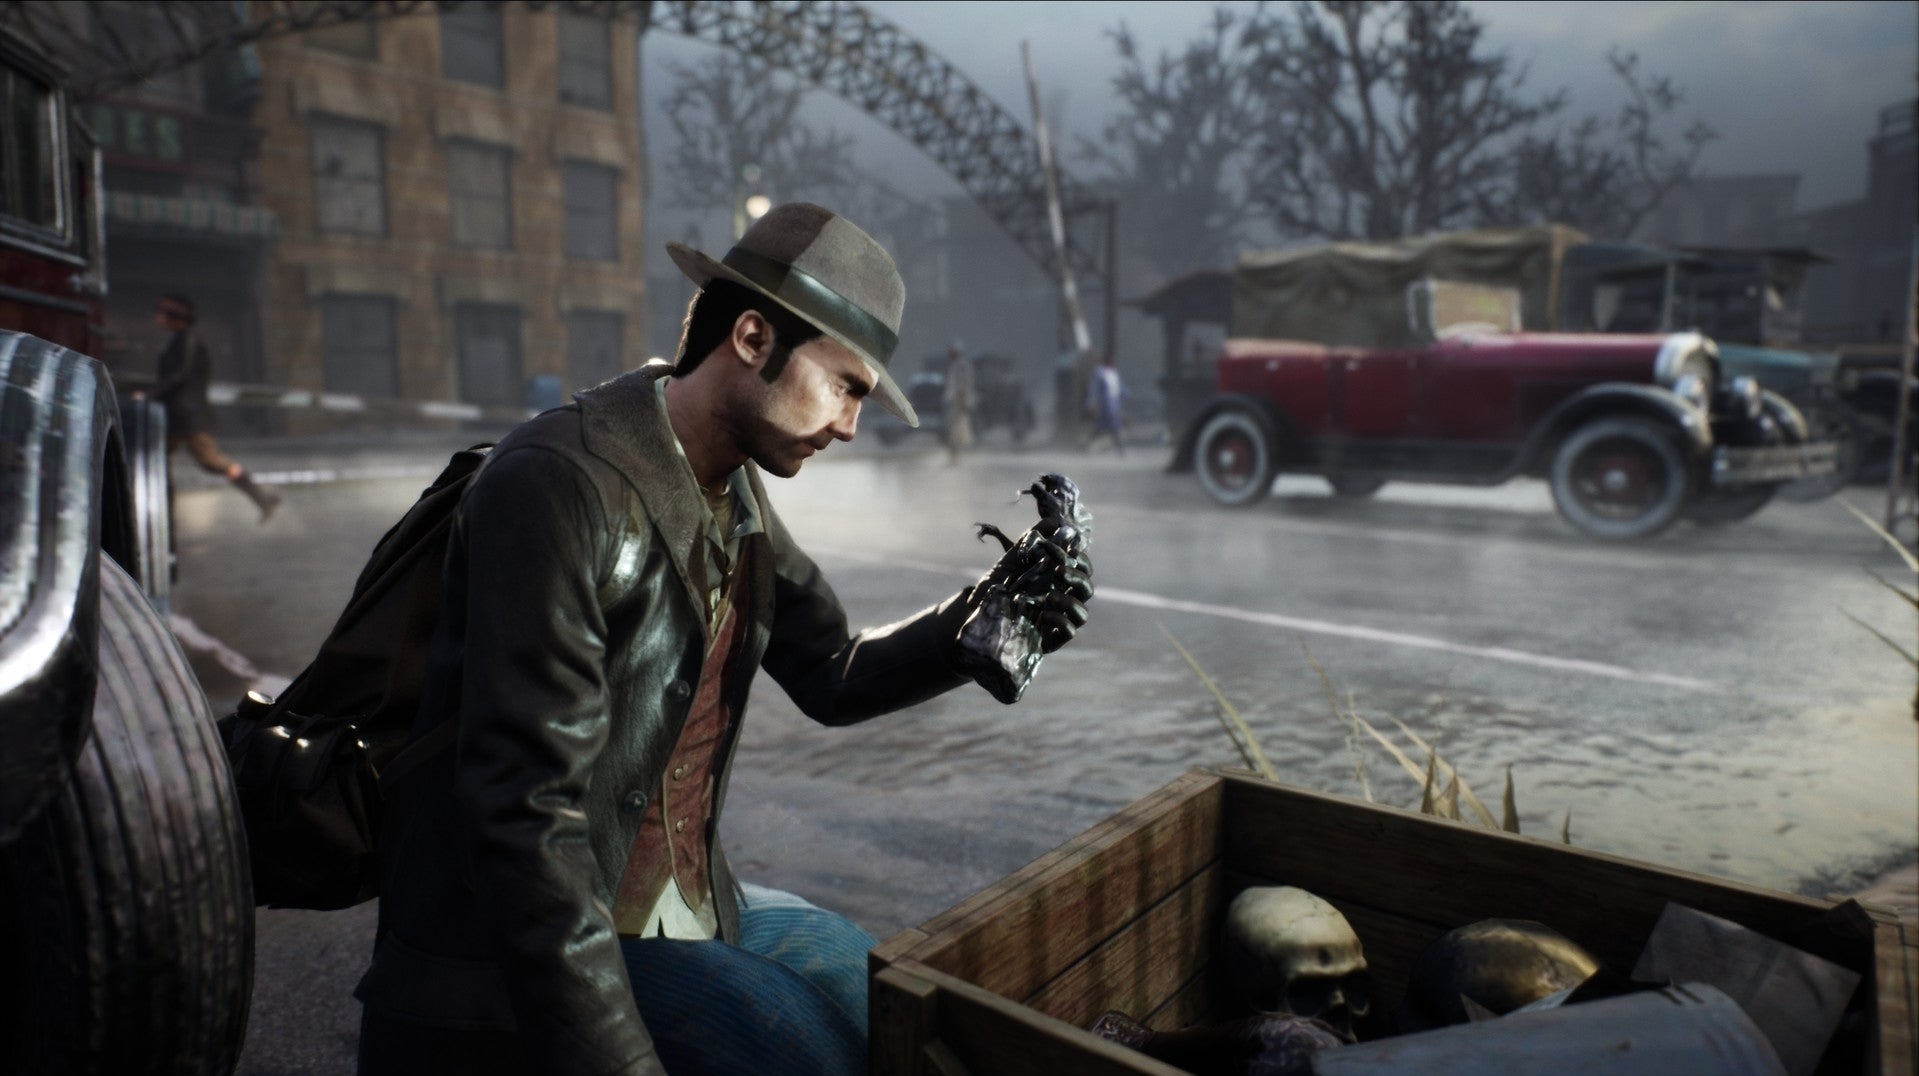 Image for The Sinking City dev accuses publisher of pirating the game and tricking Steam into uploading it